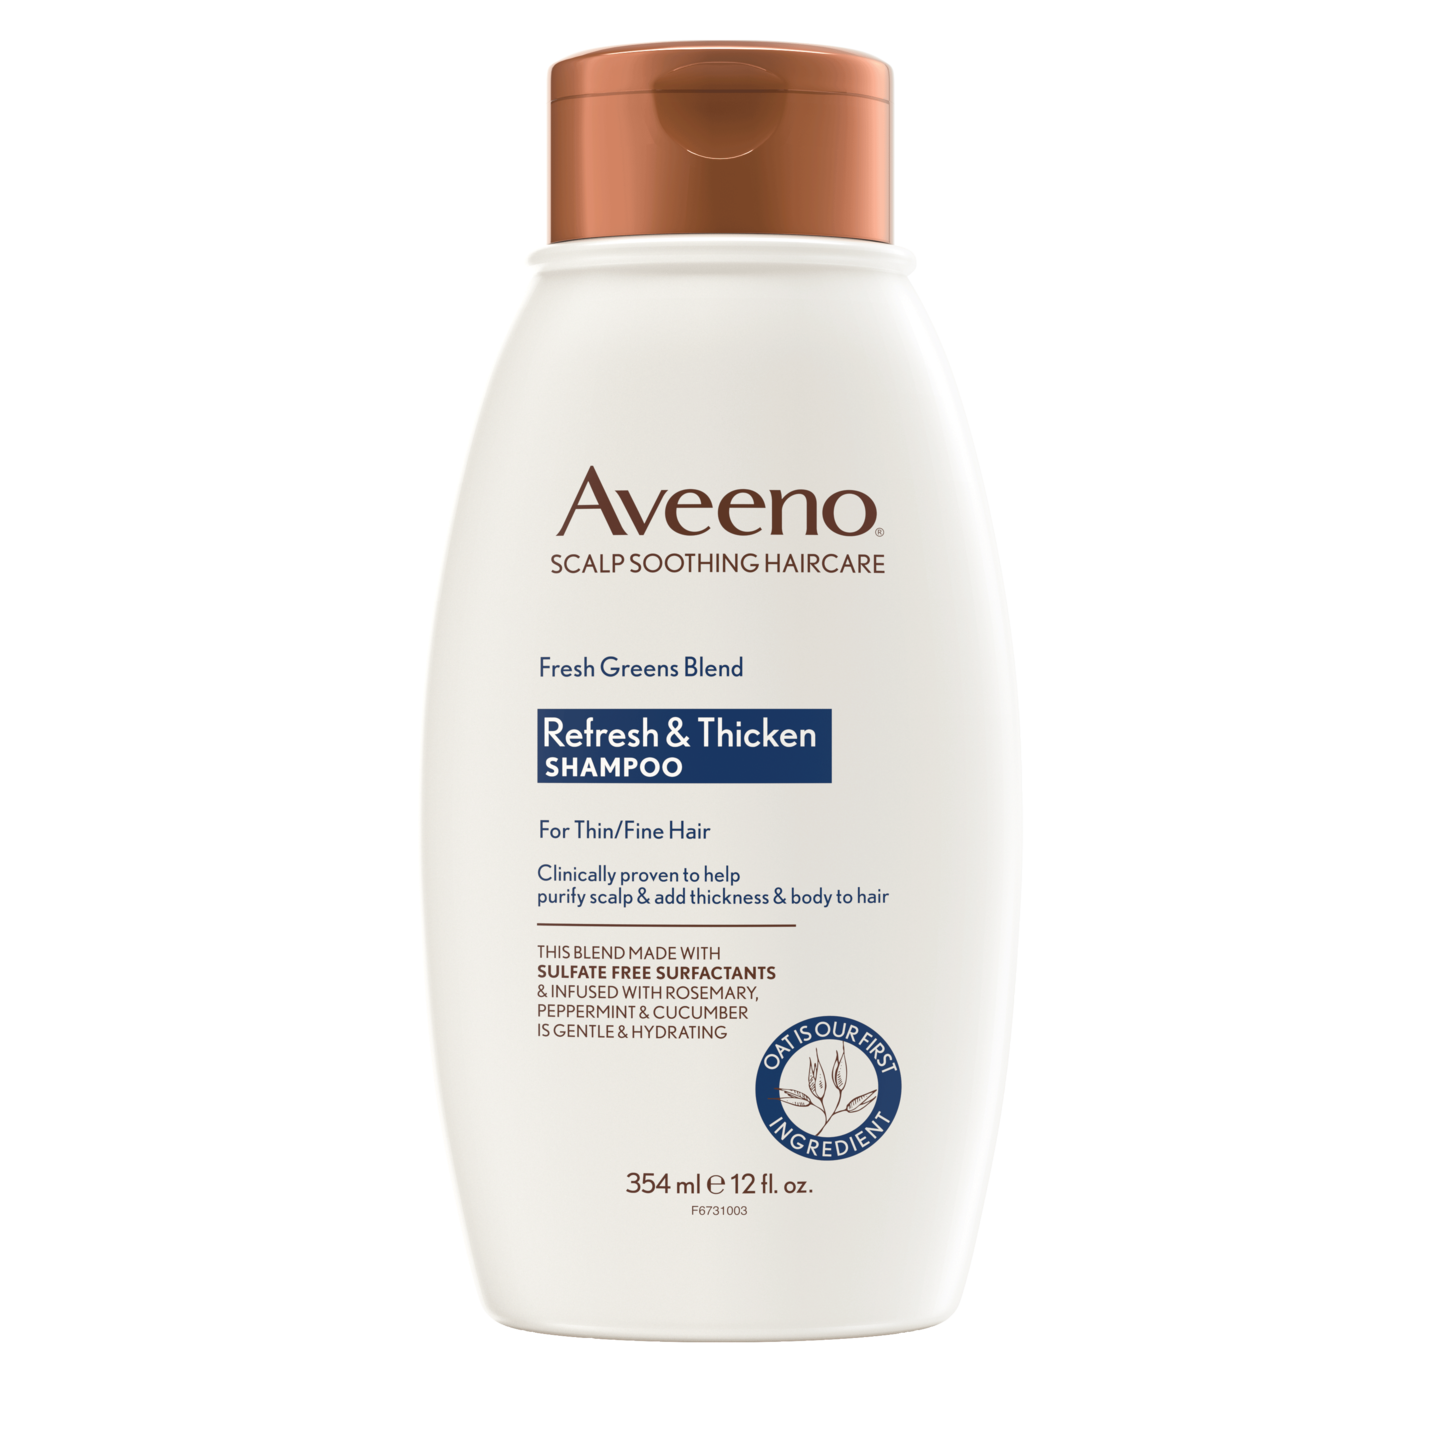 Aveeno Fresh Greens Blend Sulfate-Free Shampoo with Rosemary, Peppermint & Cucumber Refresh & Thicken, 12 fl.oz / 354ml